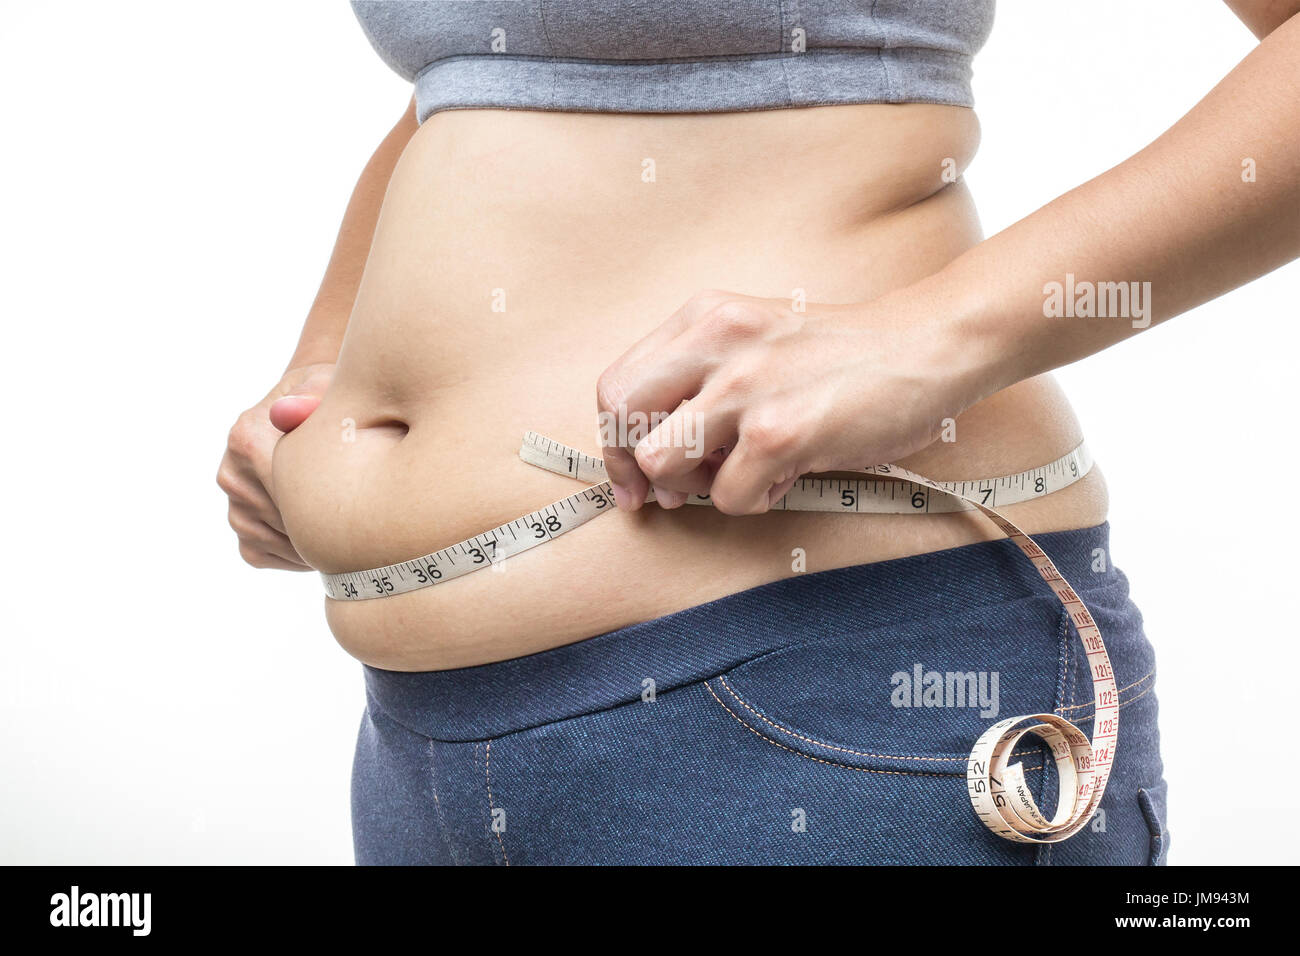 Overweight woman with tape measure around waist. Stock Photo by